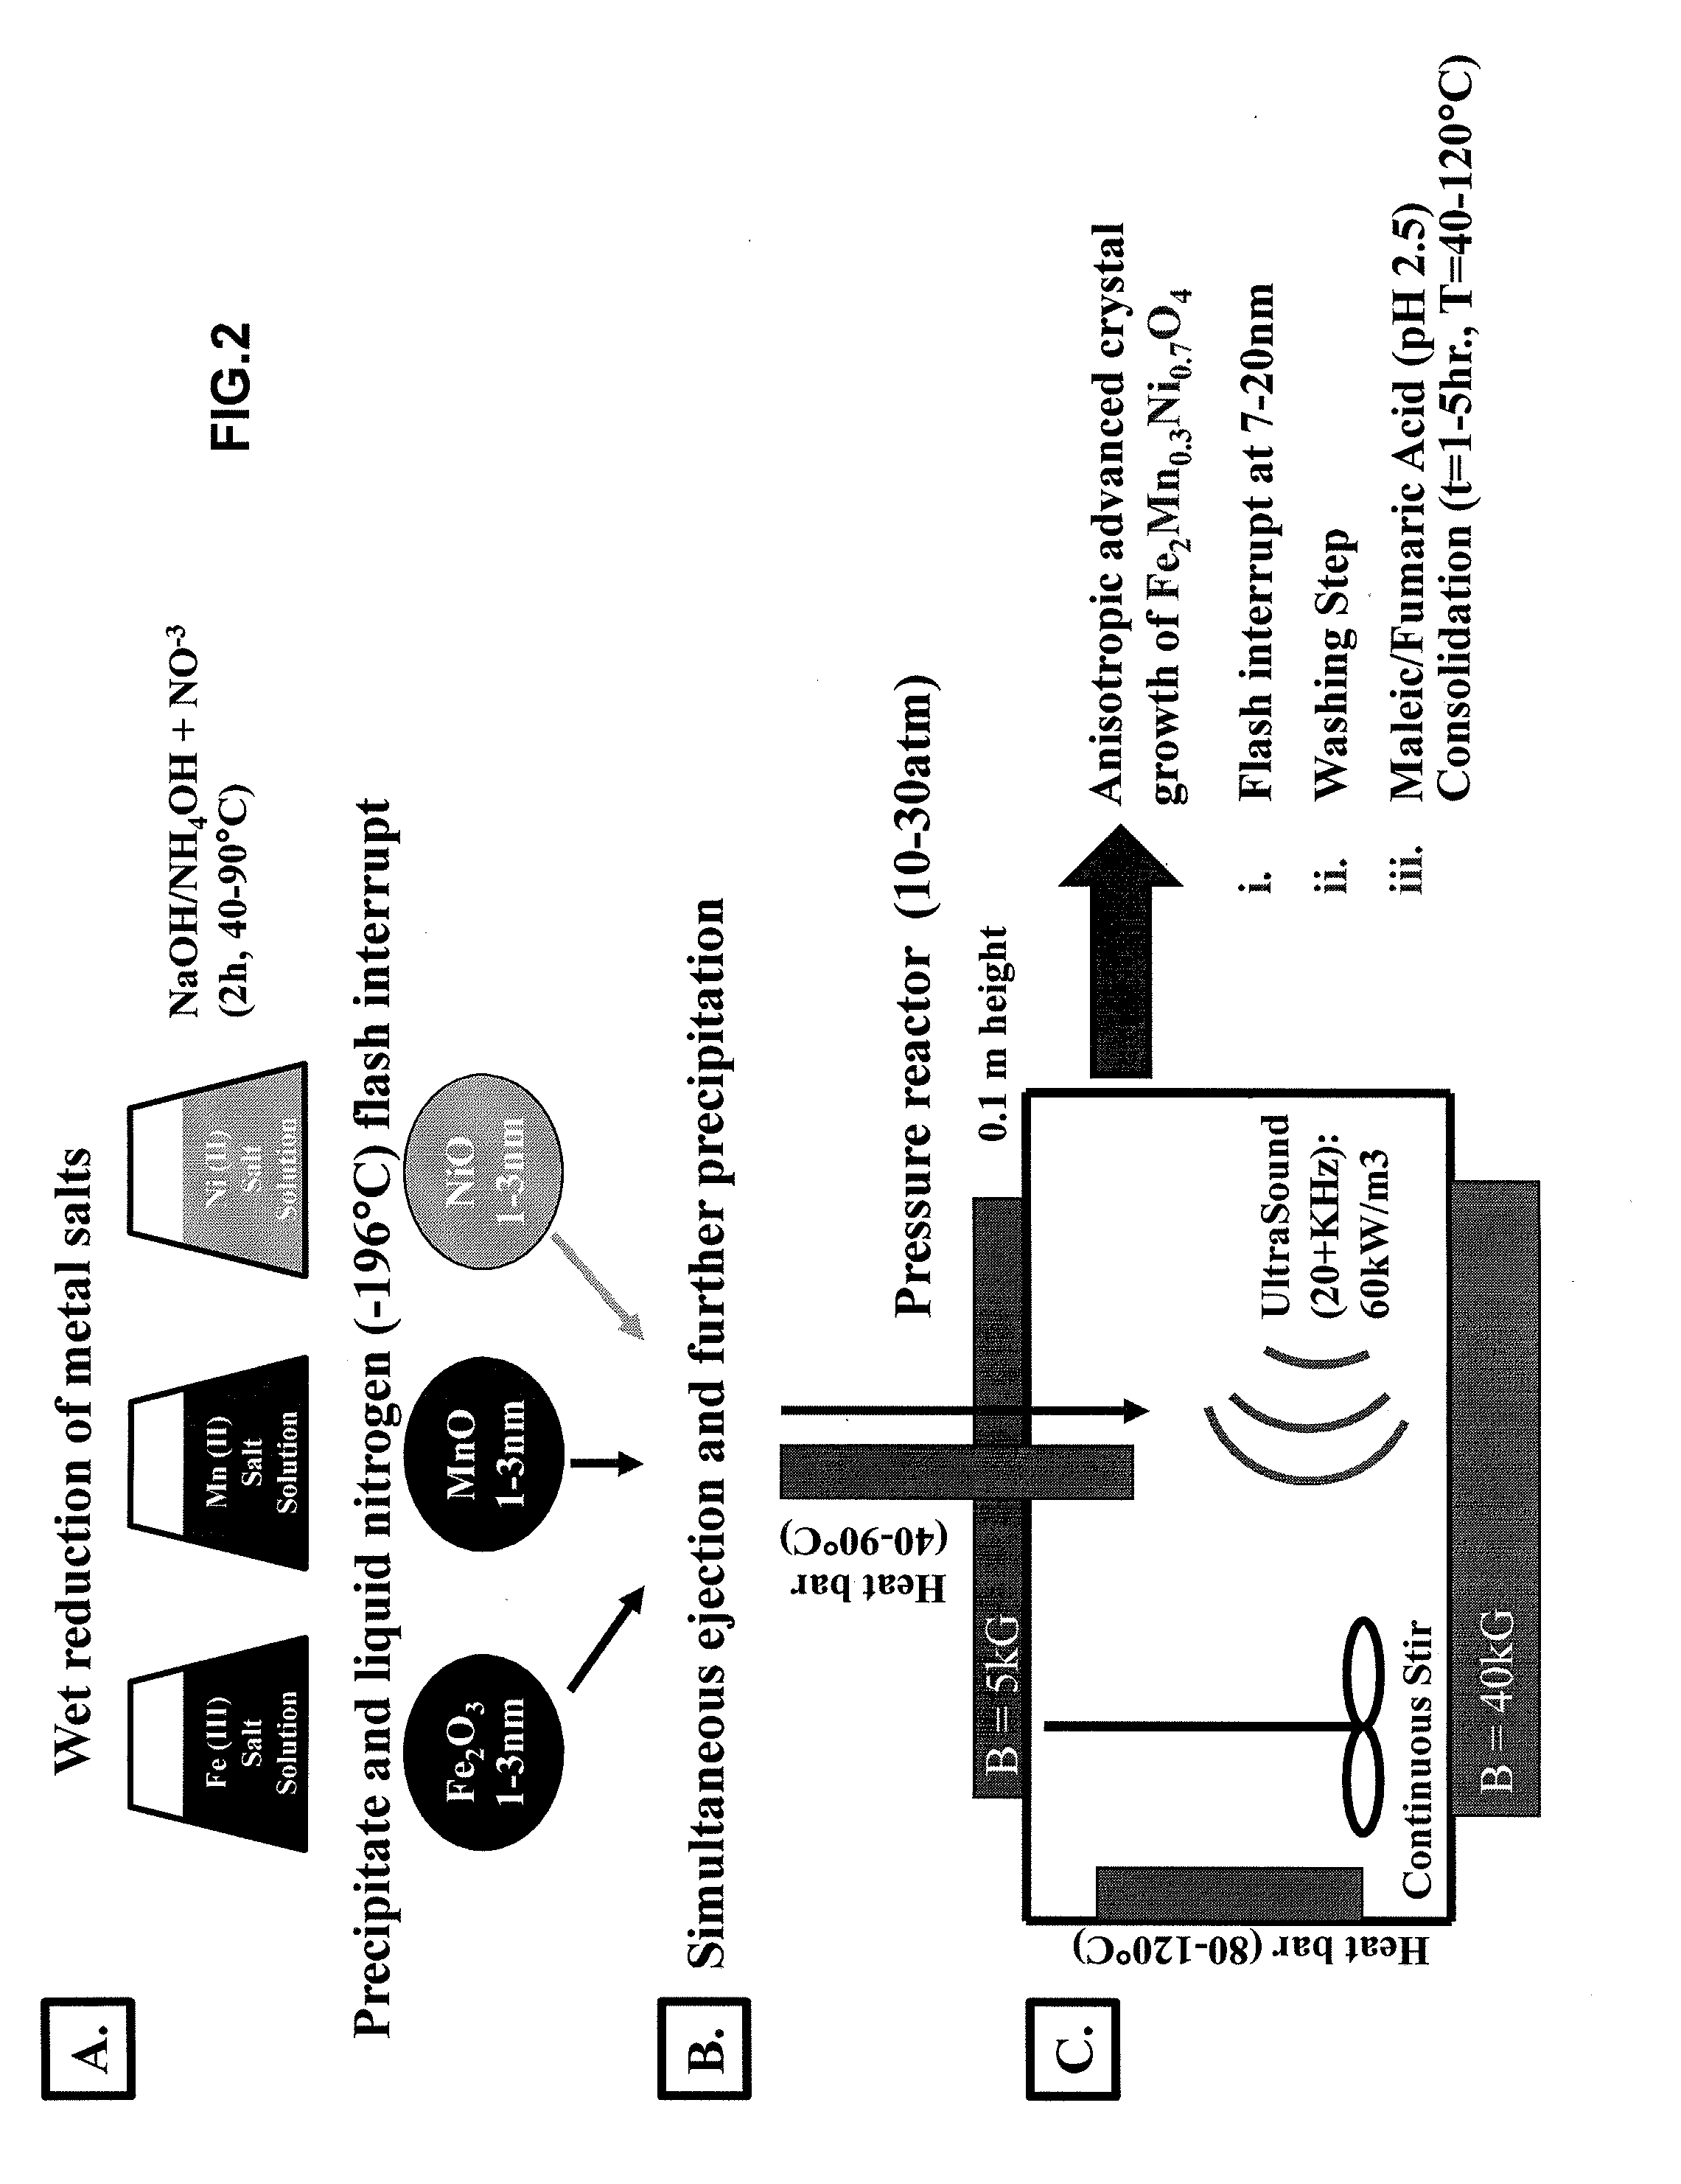 Magnetic fluid suitable for high speed and high resolution dot-on-demand inkjet printing and method of making